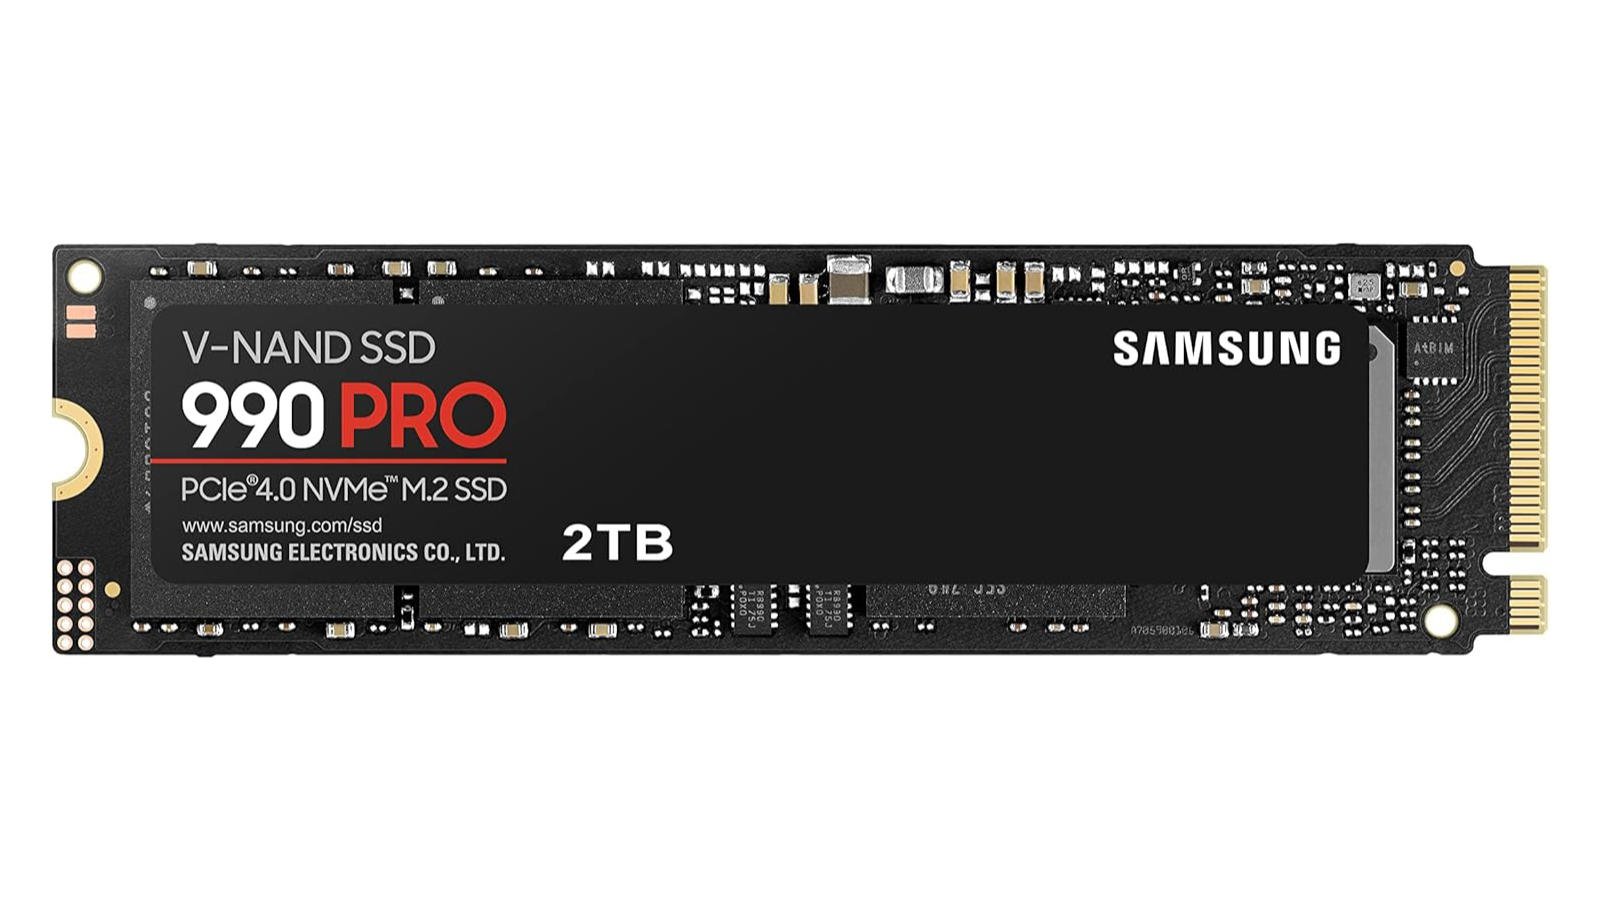 Samsung 990 Pro 2TB SSD against a white background.